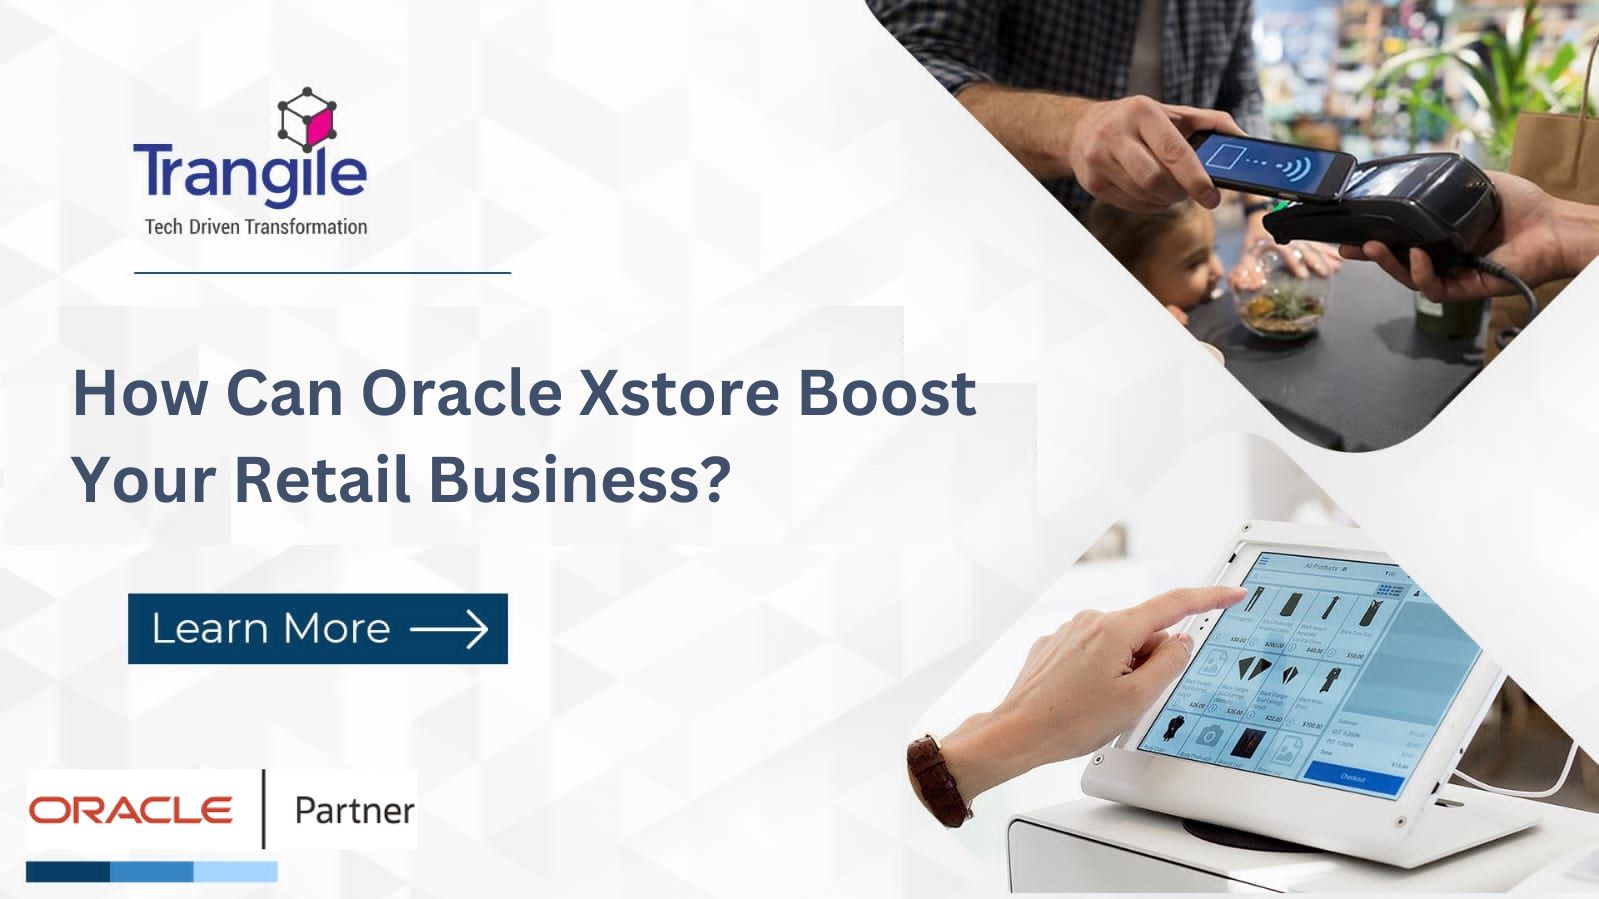 How Can Oracle Xstore Boost Your Retail Business?